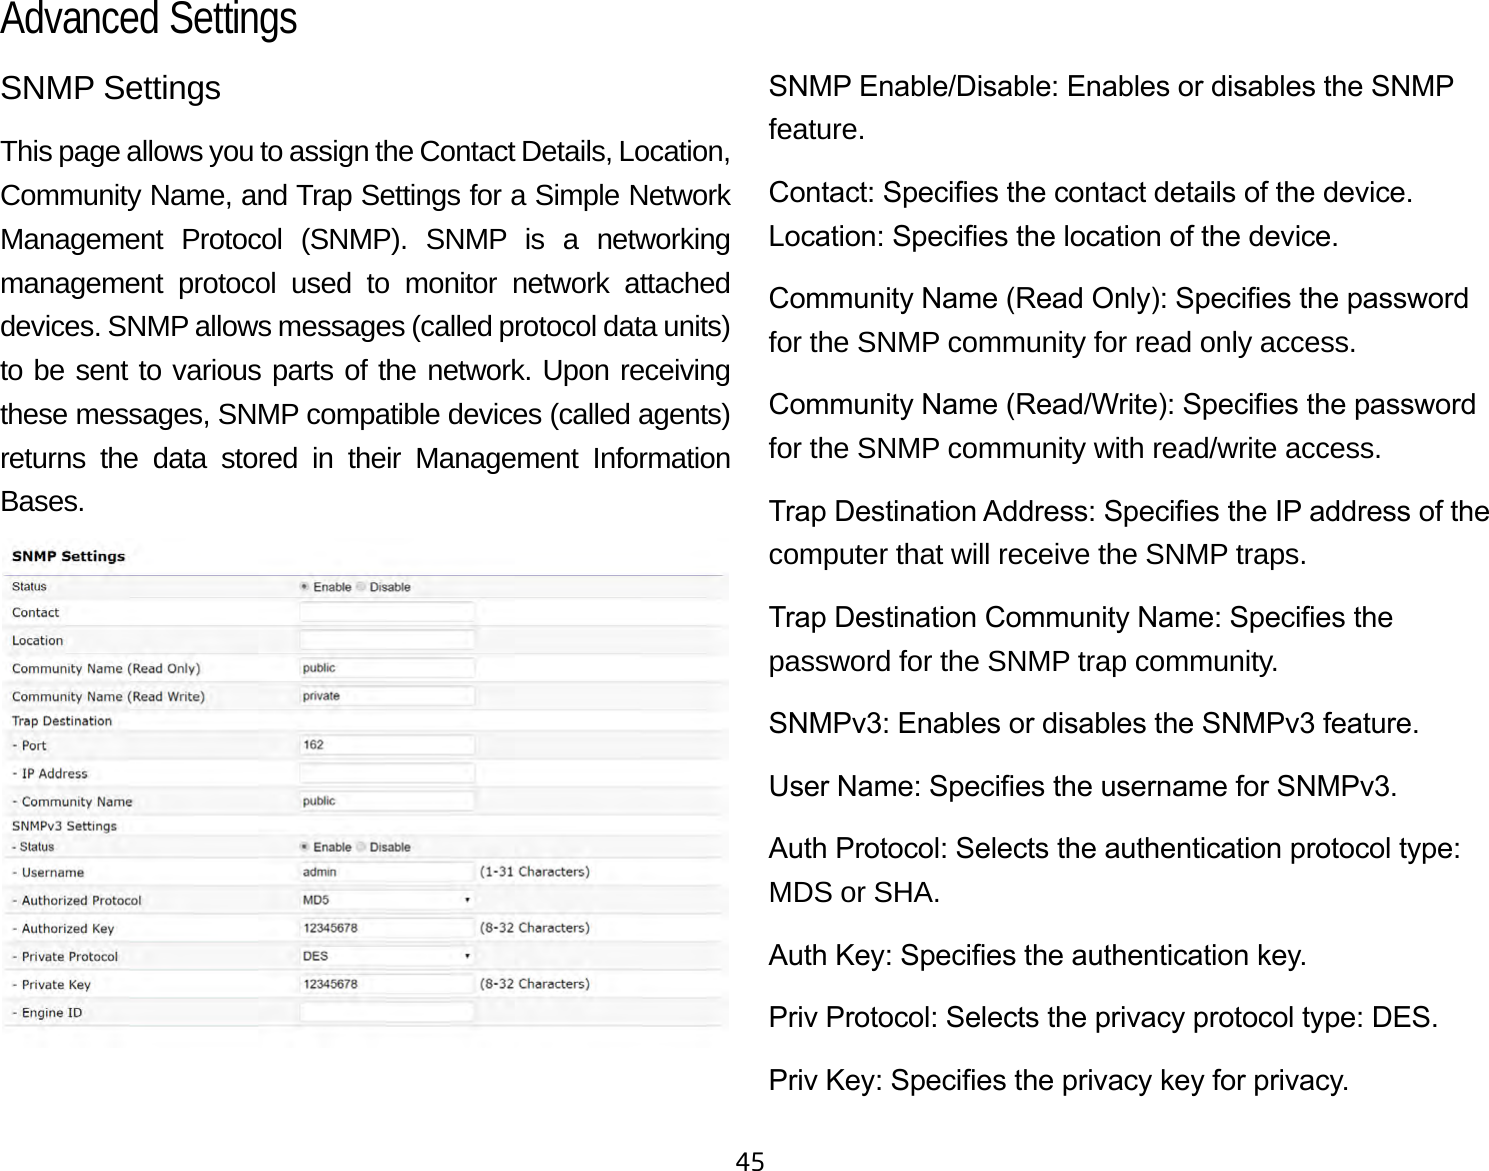 45SNMP SettingsThis page allows you to assign the Contact Details, Location, Community Name, and Trap Settings for a Simple Network Management Protocol (SNMP). SNMP is a networking management protocol used to monitor network attached devices. SNMP allows messages (called protocol data units) to be sent to various parts of the network. Upon receiving these messages, SNMP compatible devices (called agents) returns the data stored in their Management Information Bases.SNMP Enable/Disable: Enables or disables the SNMP feature.Contact: Species the contact details of the device.Location: Species the location of the device.Community Name (Read Only): Species the password for the SNMP community for read only access.Community Name (Read/Write): Species the password for the SNMP community with read/write access.Trap Destination Address: Species the IP address of the computer that will receive the SNMP traps.Trap Destination Community Name: Species the password for the SNMP trap community.SNMPv3: Enables or disables the SNMPv3 feature.User Name: Species the username for SNMPv3.Auth Protocol: Selects the authentication protocol type: MDS or SHA.Auth Key: Species the authentication key.Priv Protocol: Selects the privacy protocol type: DES.Priv Key: Species the privacy key for privacy.Advanced Settings